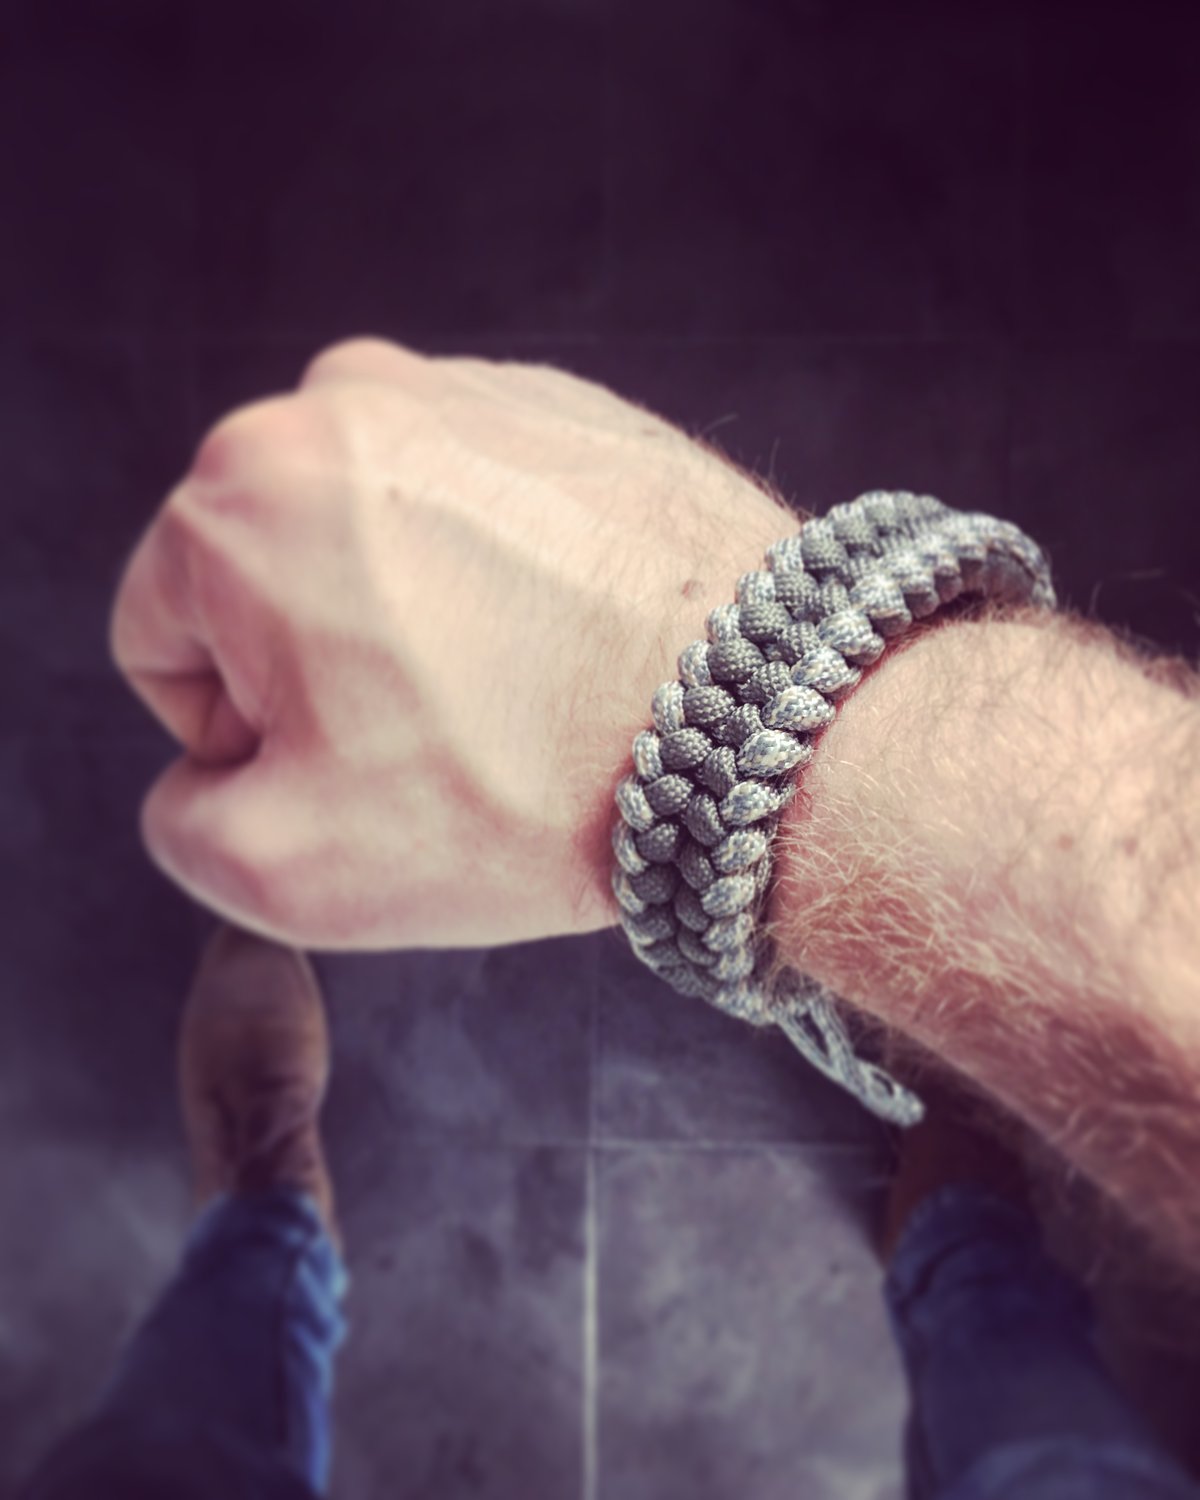 Image of KMP 'MAD MAX' style Sanctified Wristband